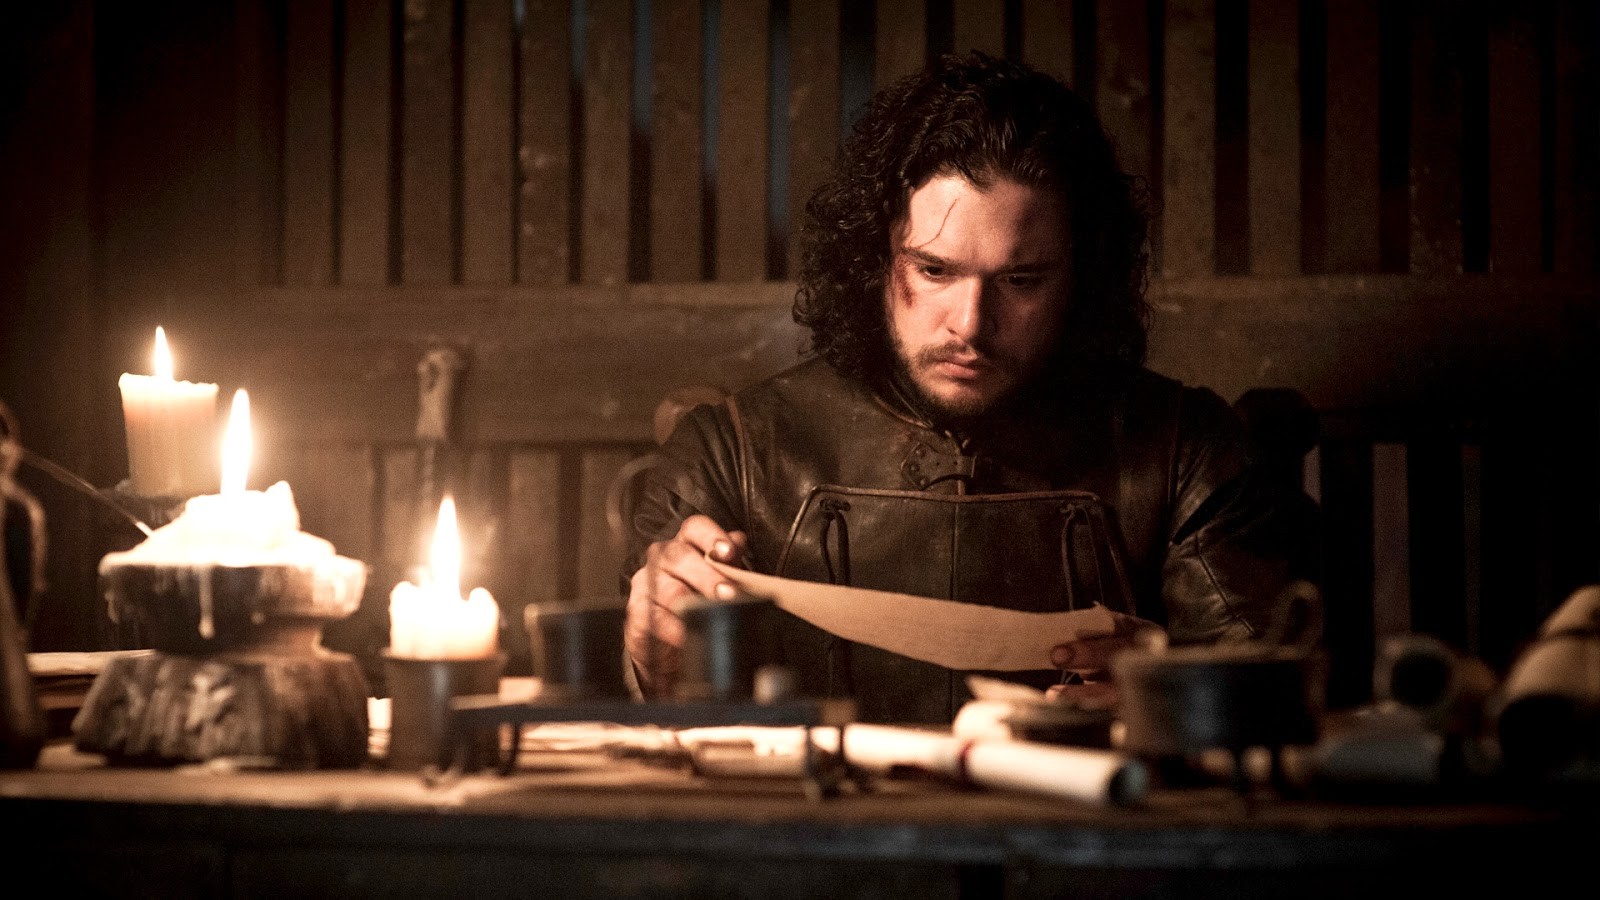 What I Learned by Binge-Watching 'Game of Thrones' Backward